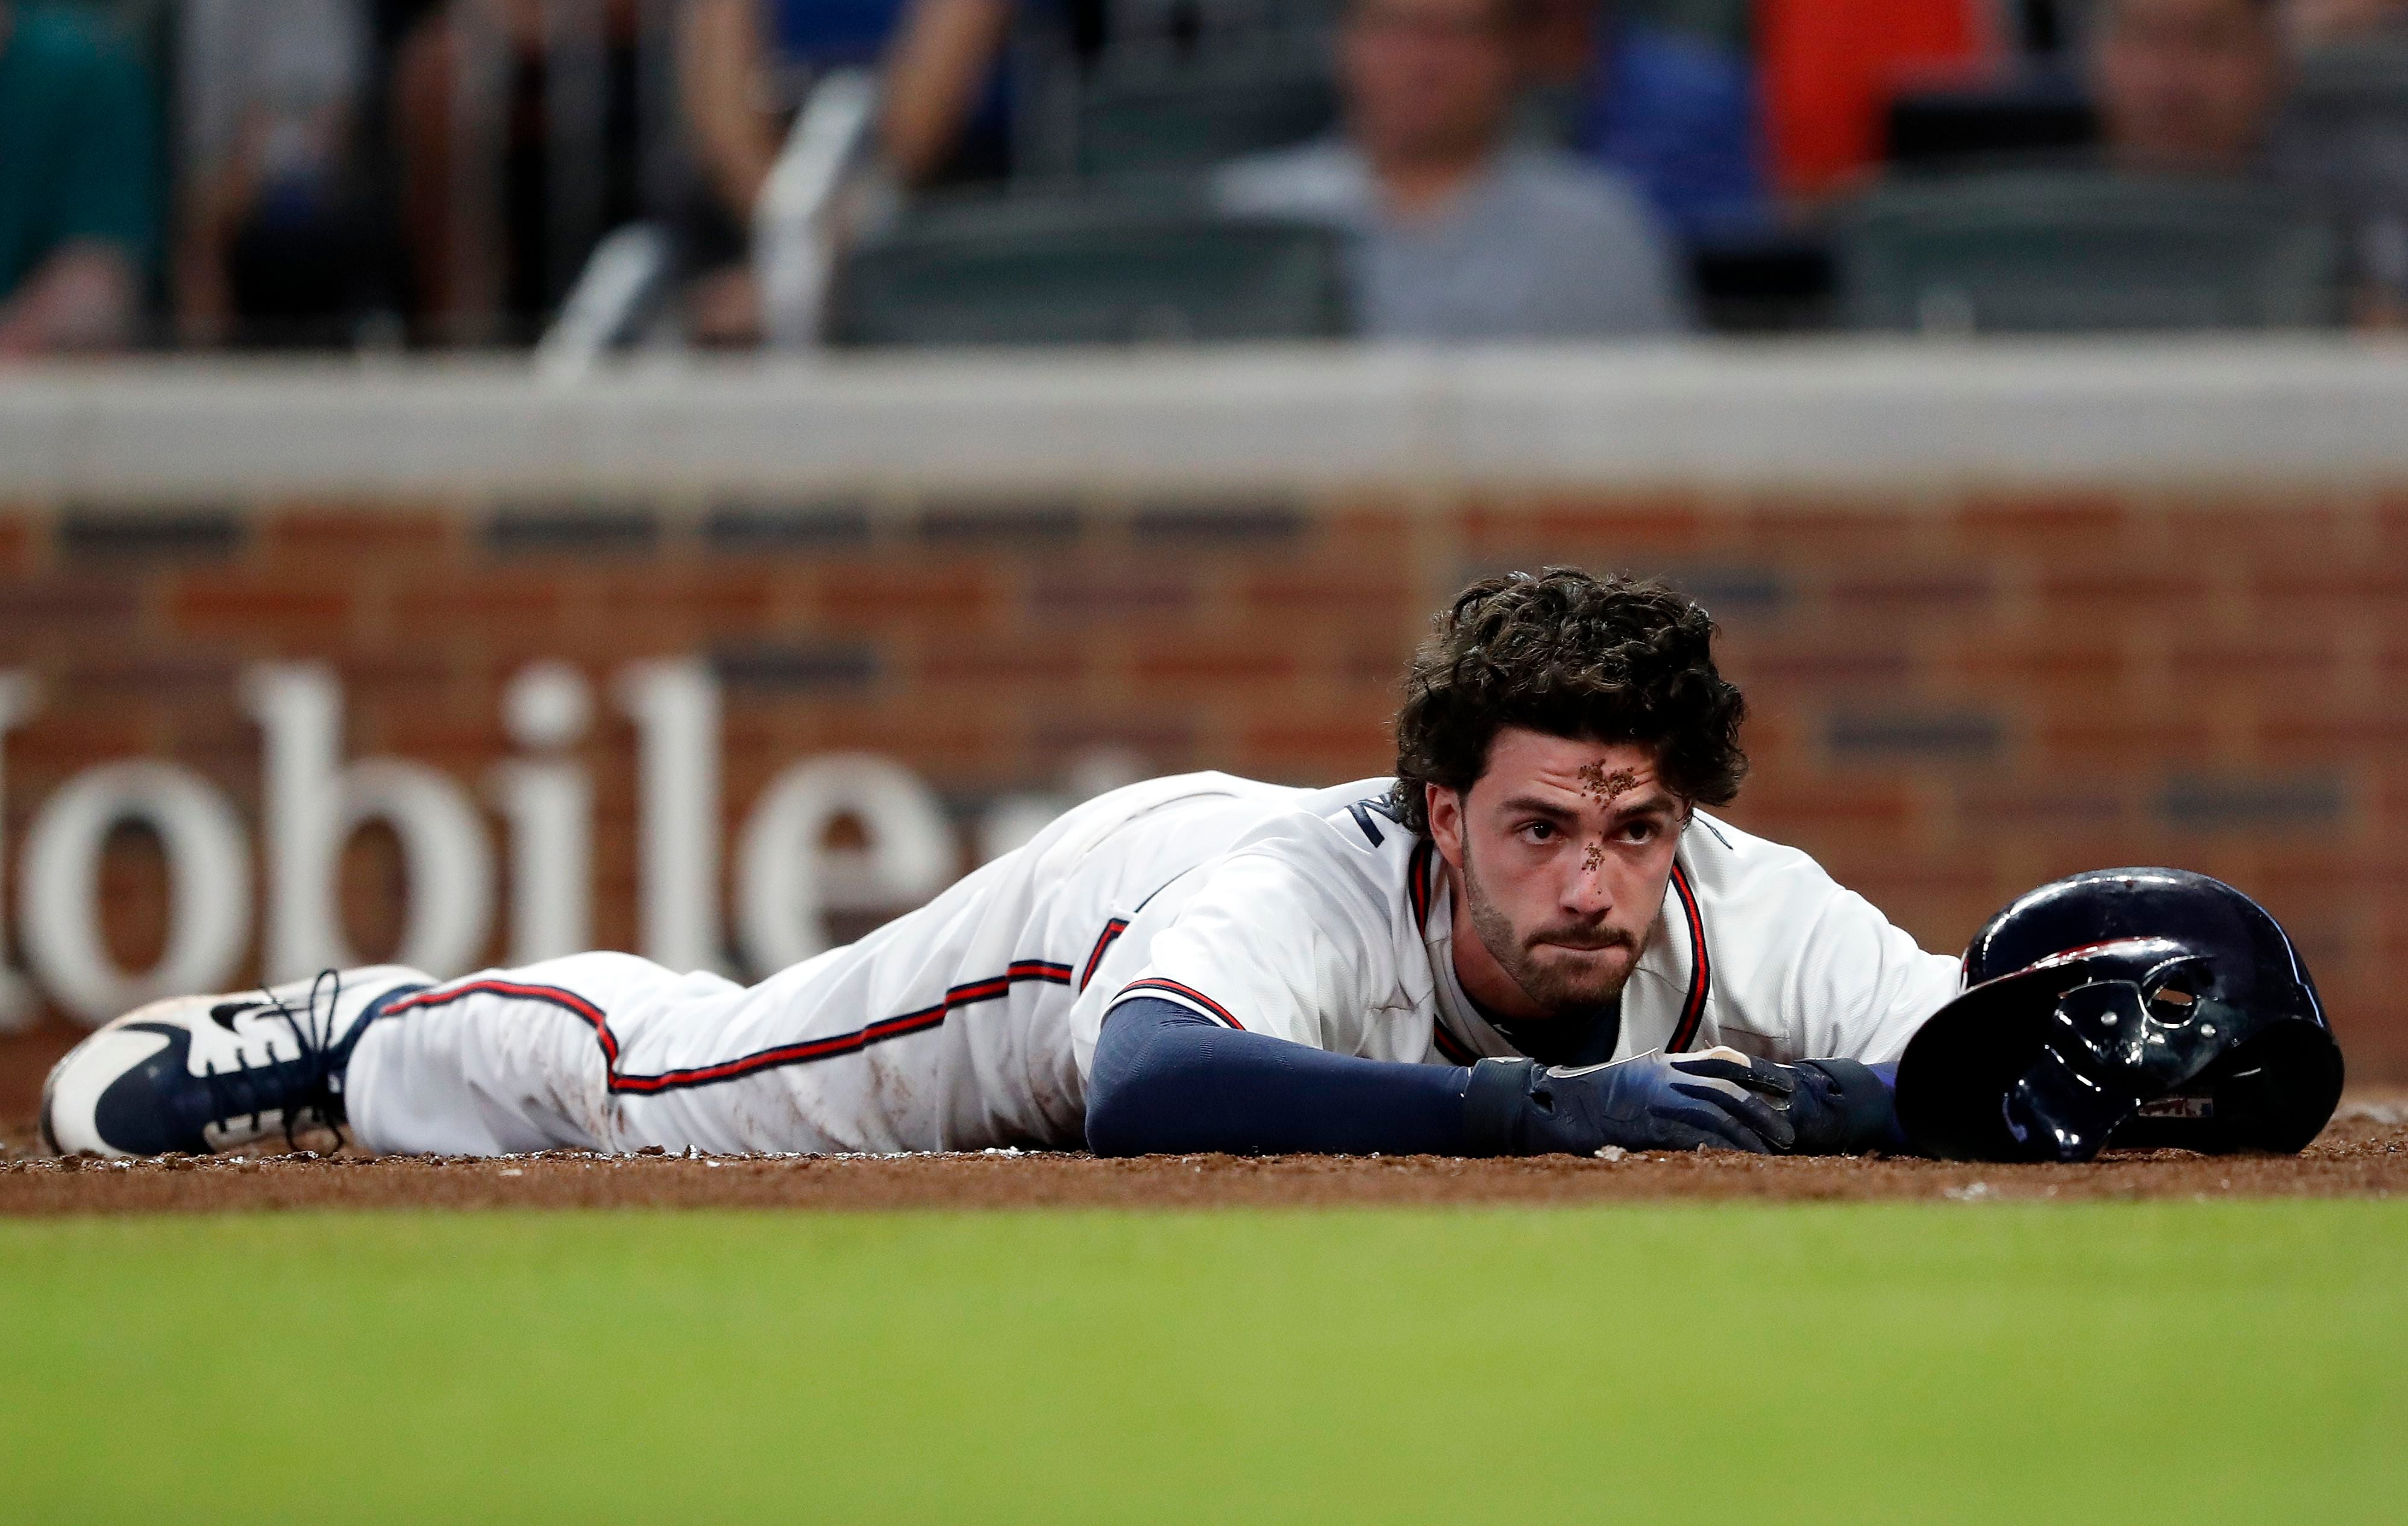 Dansby Swanson hurt sliding into second, 05/01/2023